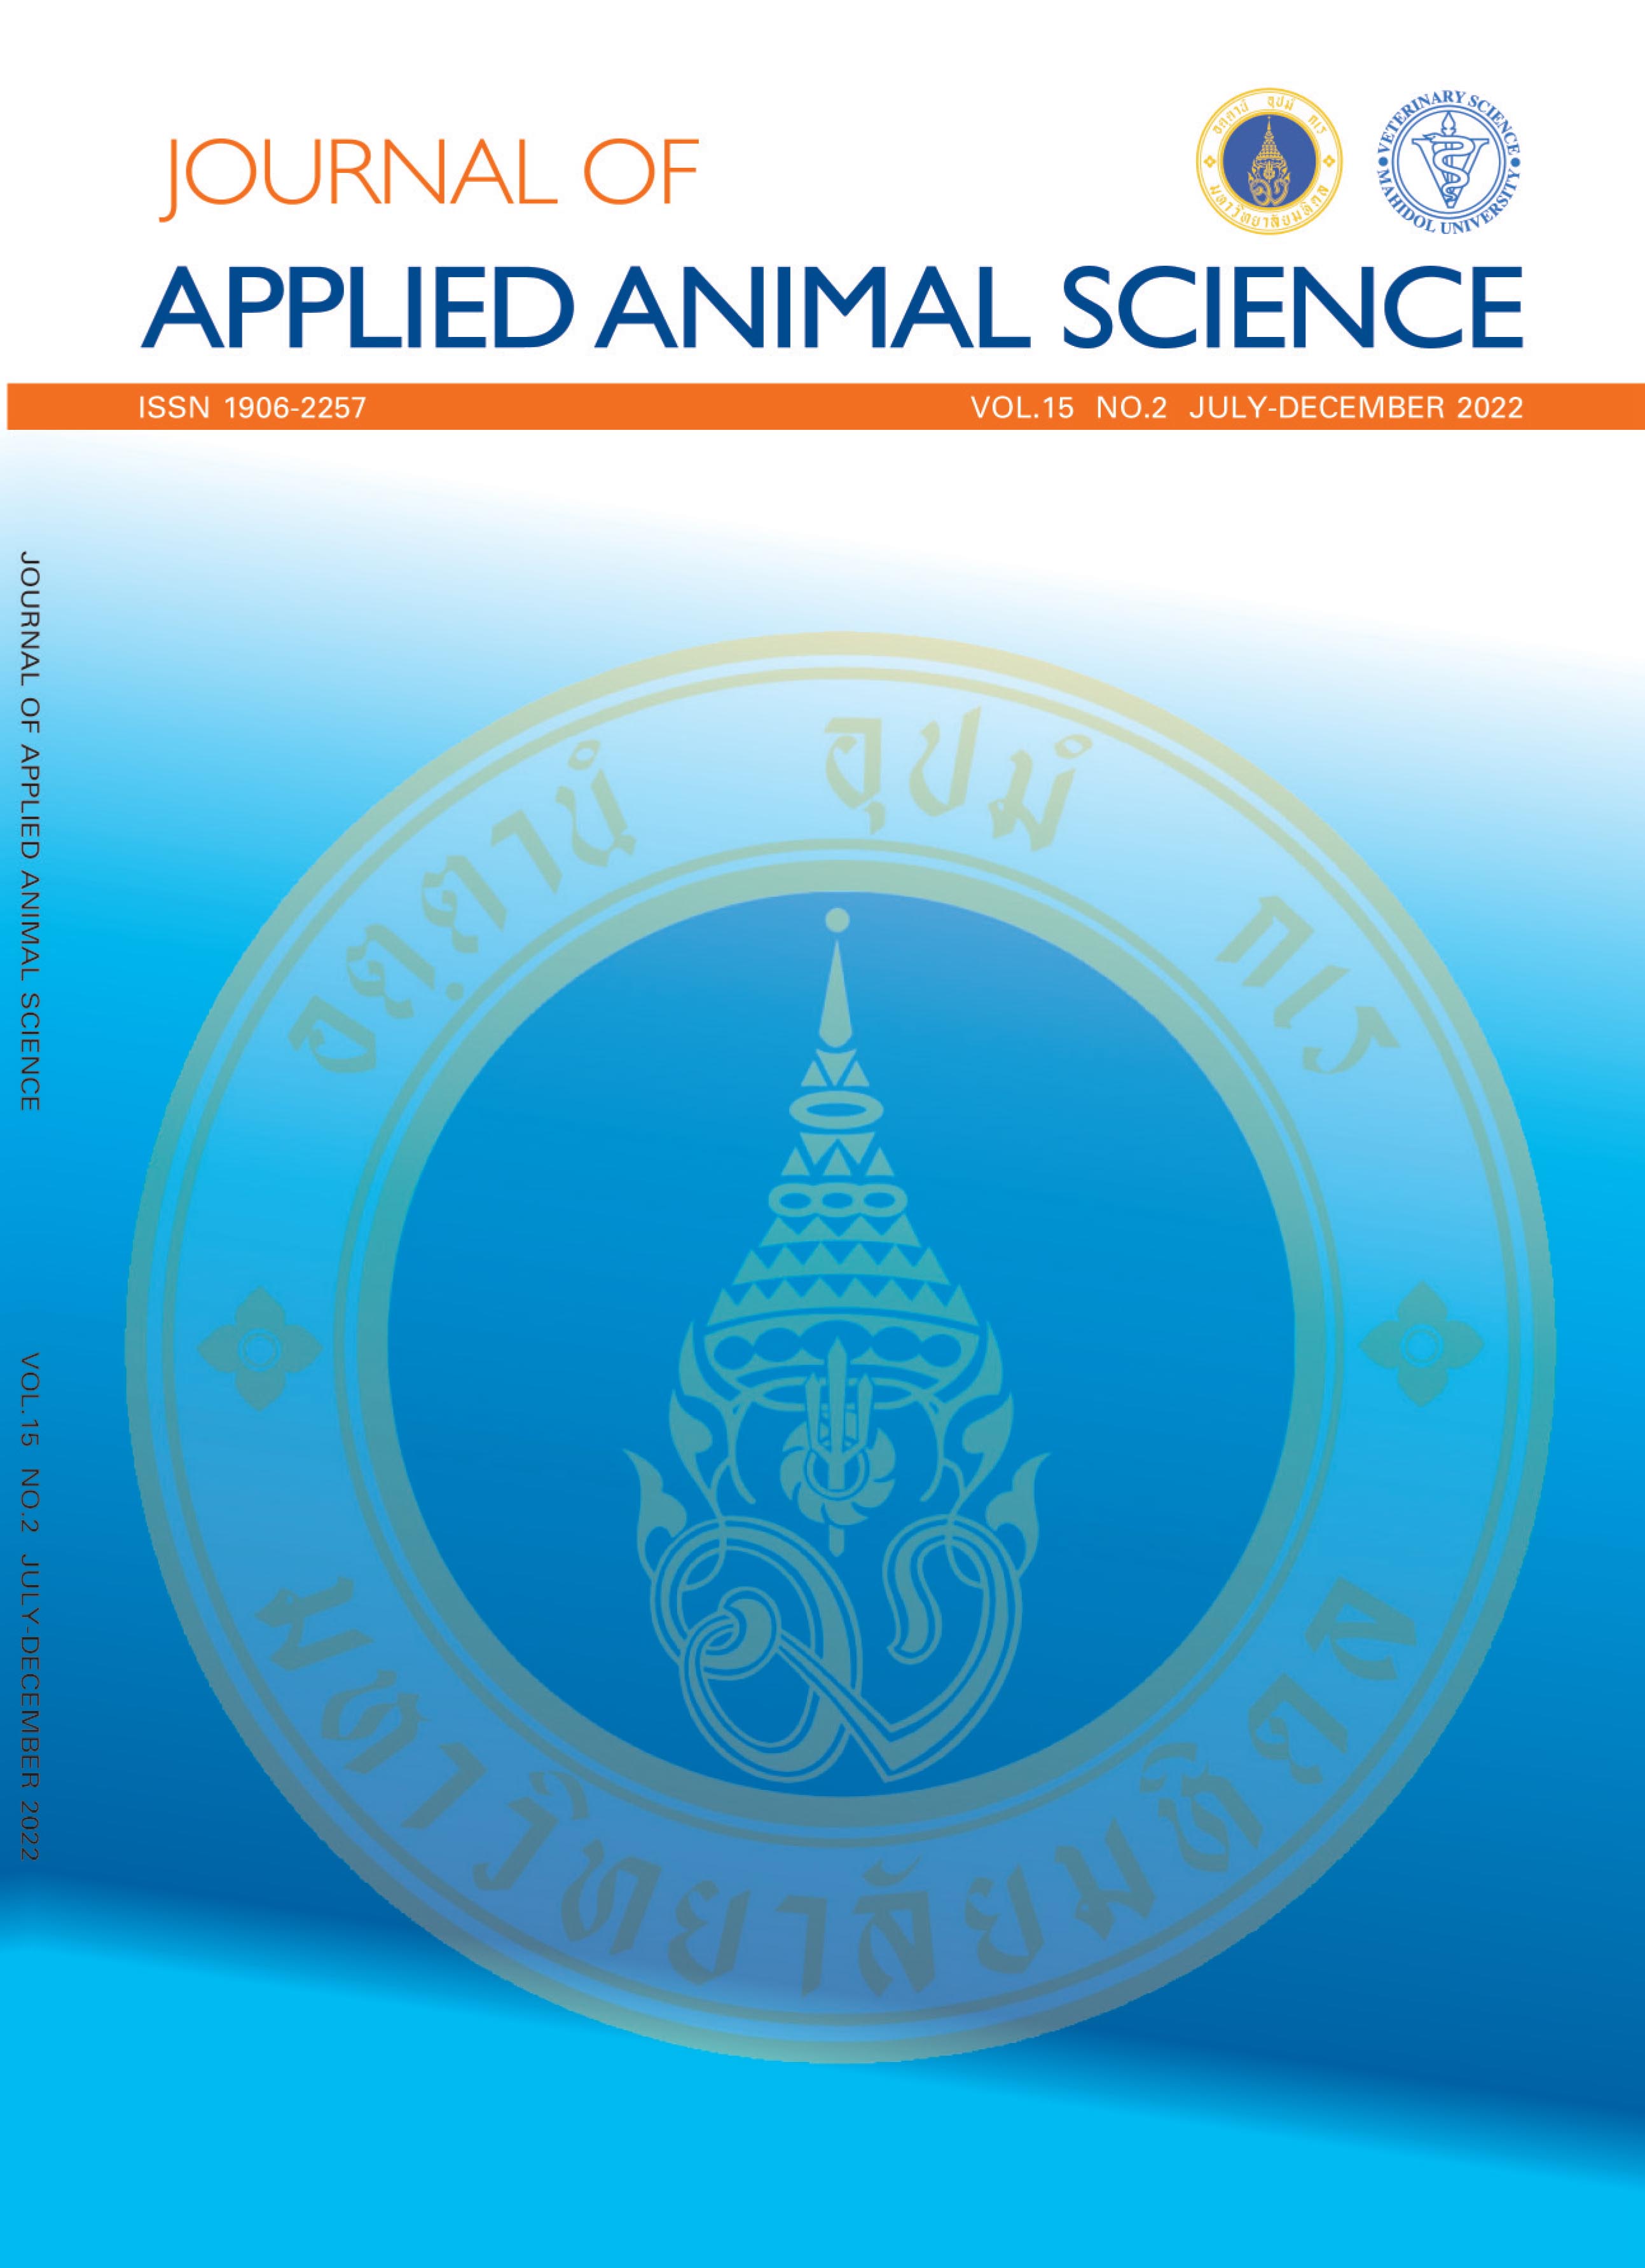 The Surveillance of Antimicrobial Susceptibility Pattern and blaCTX-M Gene  Encoding in Escherichia coli Isolated from Healthy Goat Farms in Sai Yok  District, Kanchanaburi Province, Thailand | Journal of Applied Animal  Science